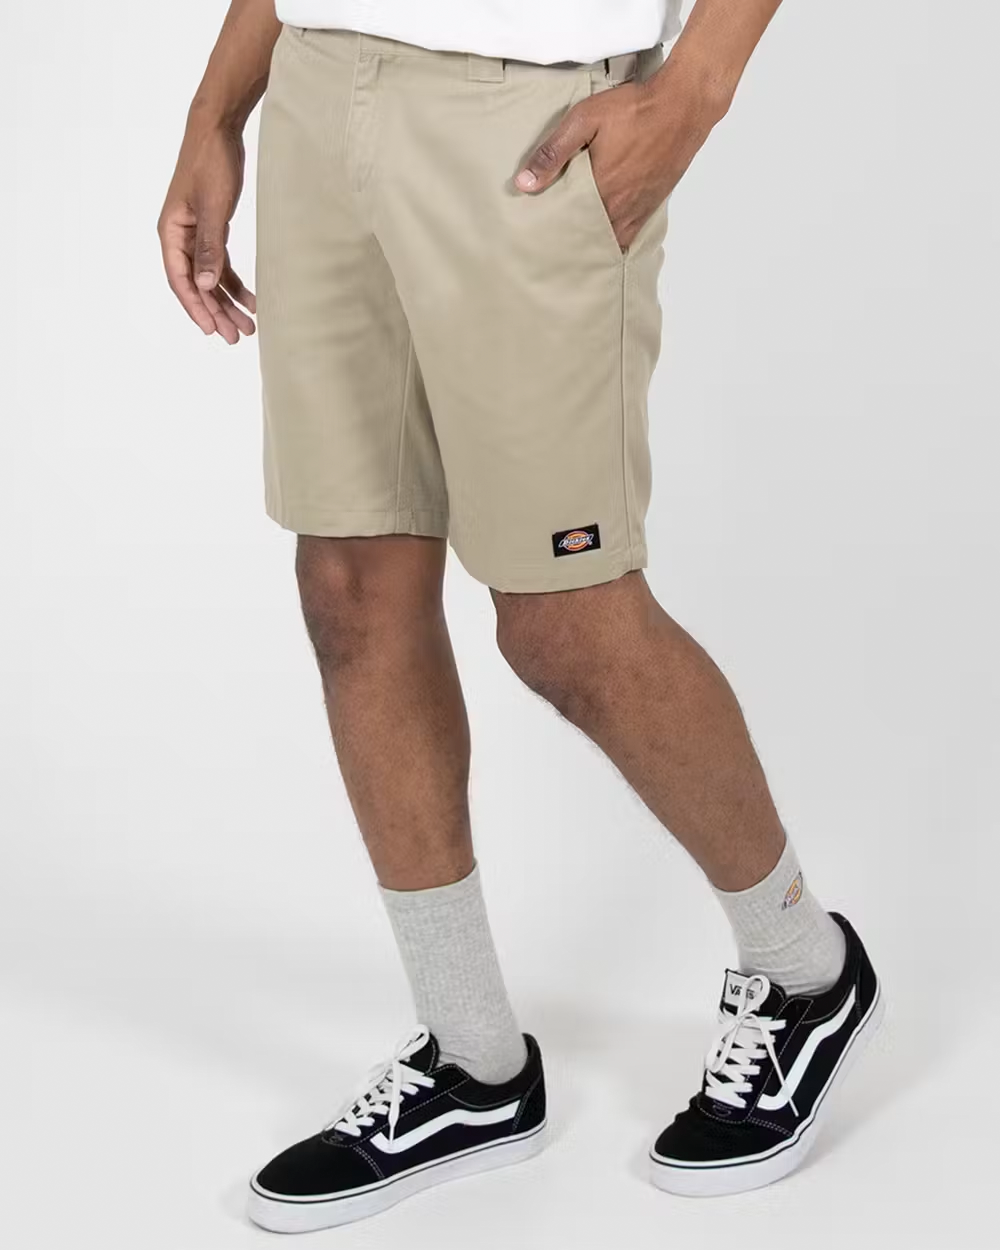 DICKIES 852 Relaxed Fit 11 Work Shorts - Desert Sand - VENUE.